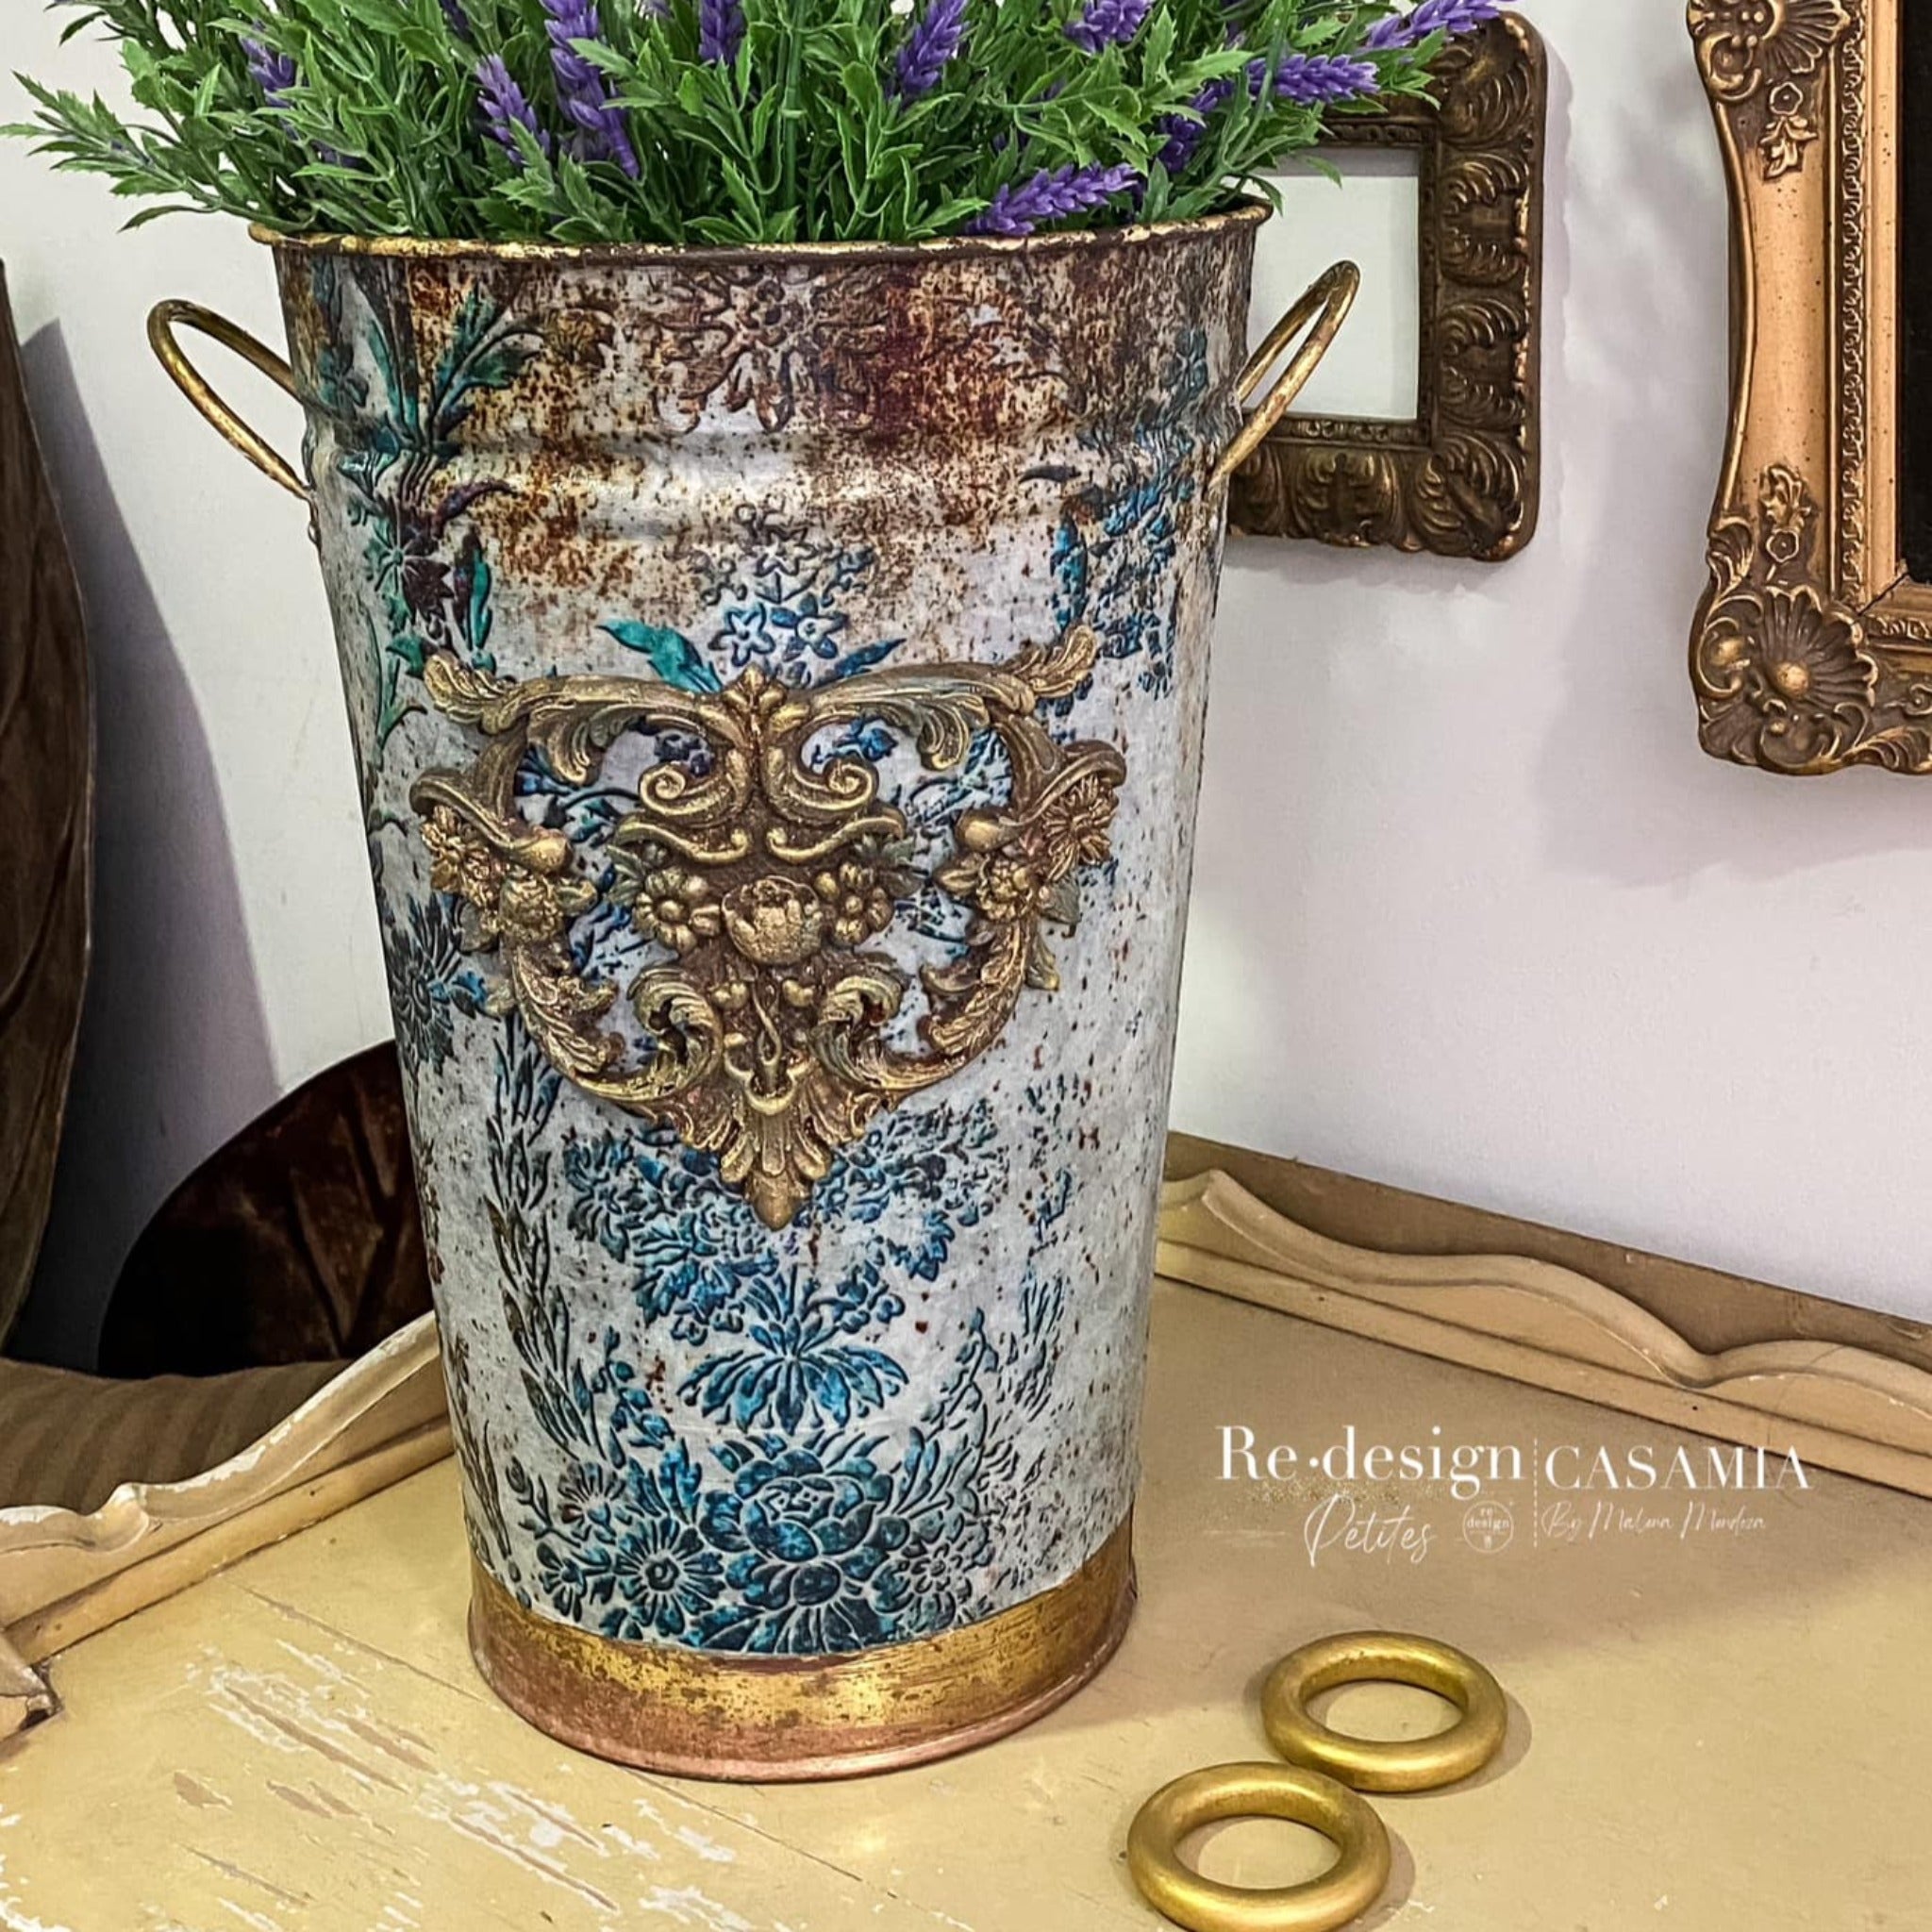 A metal can turned into a vase refurbished by Casamia by Malena Mendoza features ReDesign with Prima's Rustic Patina tissue paper along with a gold painted silicone mould casting and antiqued gold accents.